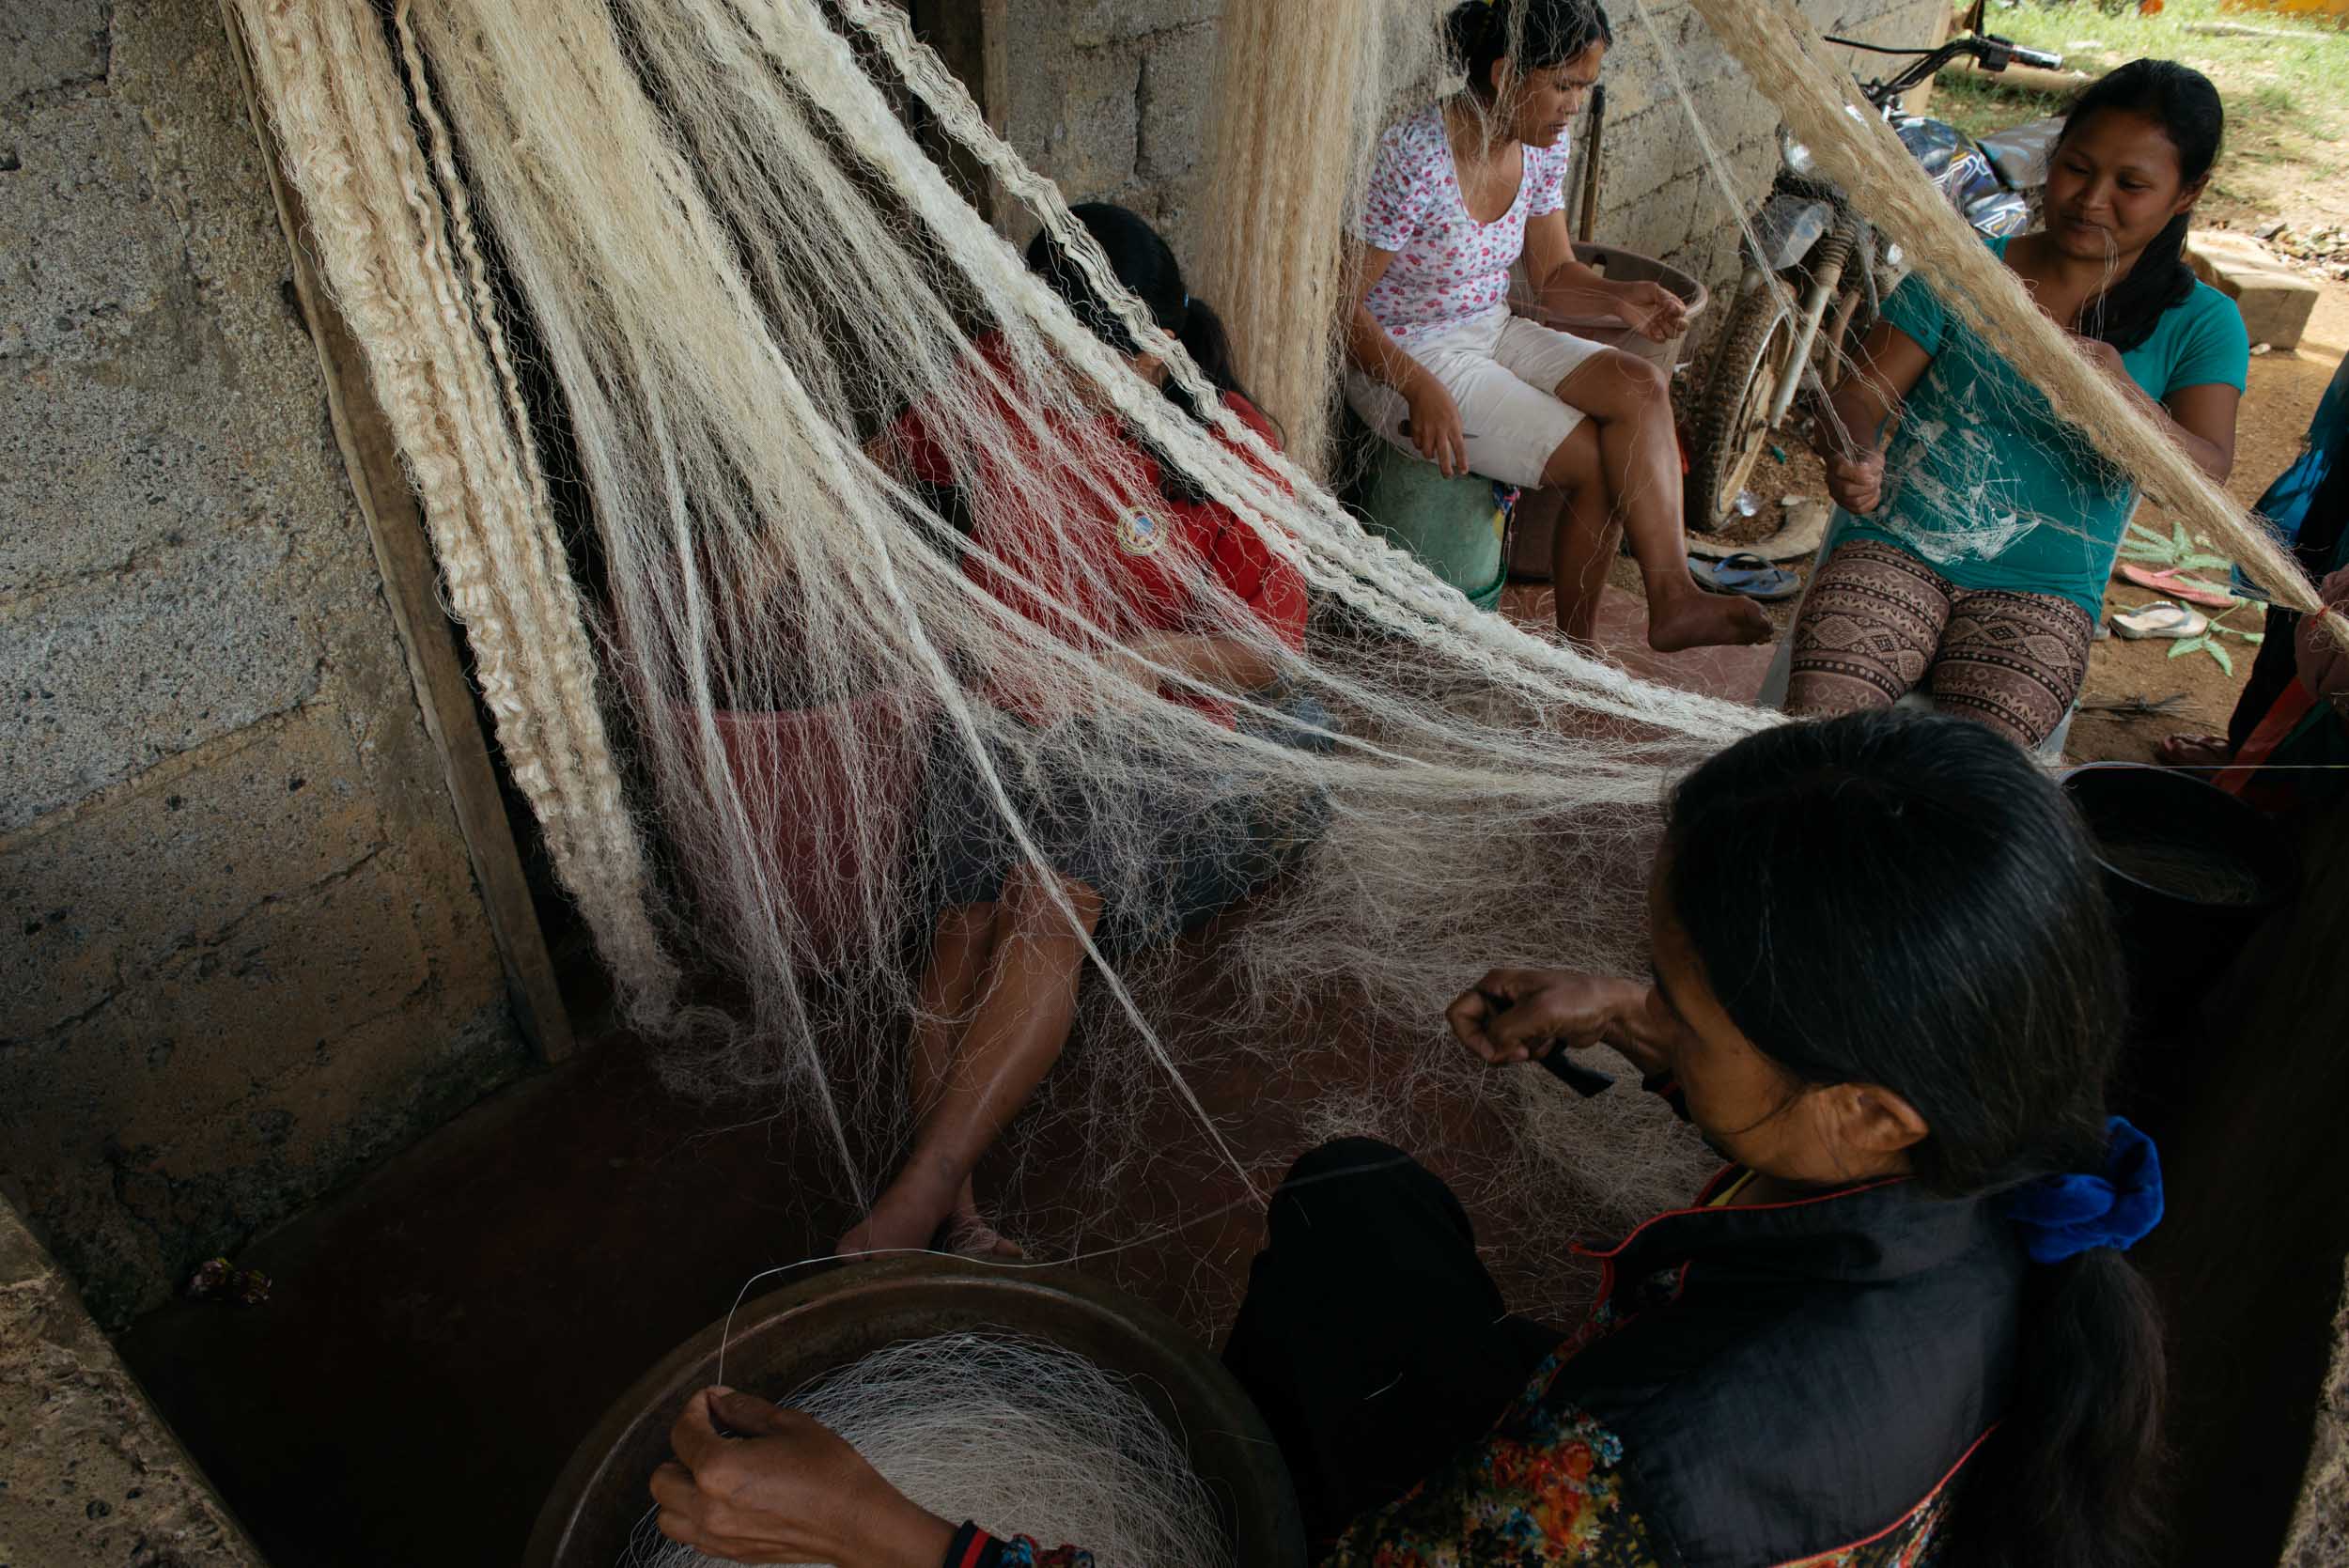  The women from the community&nbsp;will then start their afternoons with a side of daily chats and catch-ups through&nbsp; pagkukuyakay&nbsp; or choosing strands of fiber from a hanged freshly sun-baked&nbsp; lanot . By&nbsp; pagkuyakay , they patien